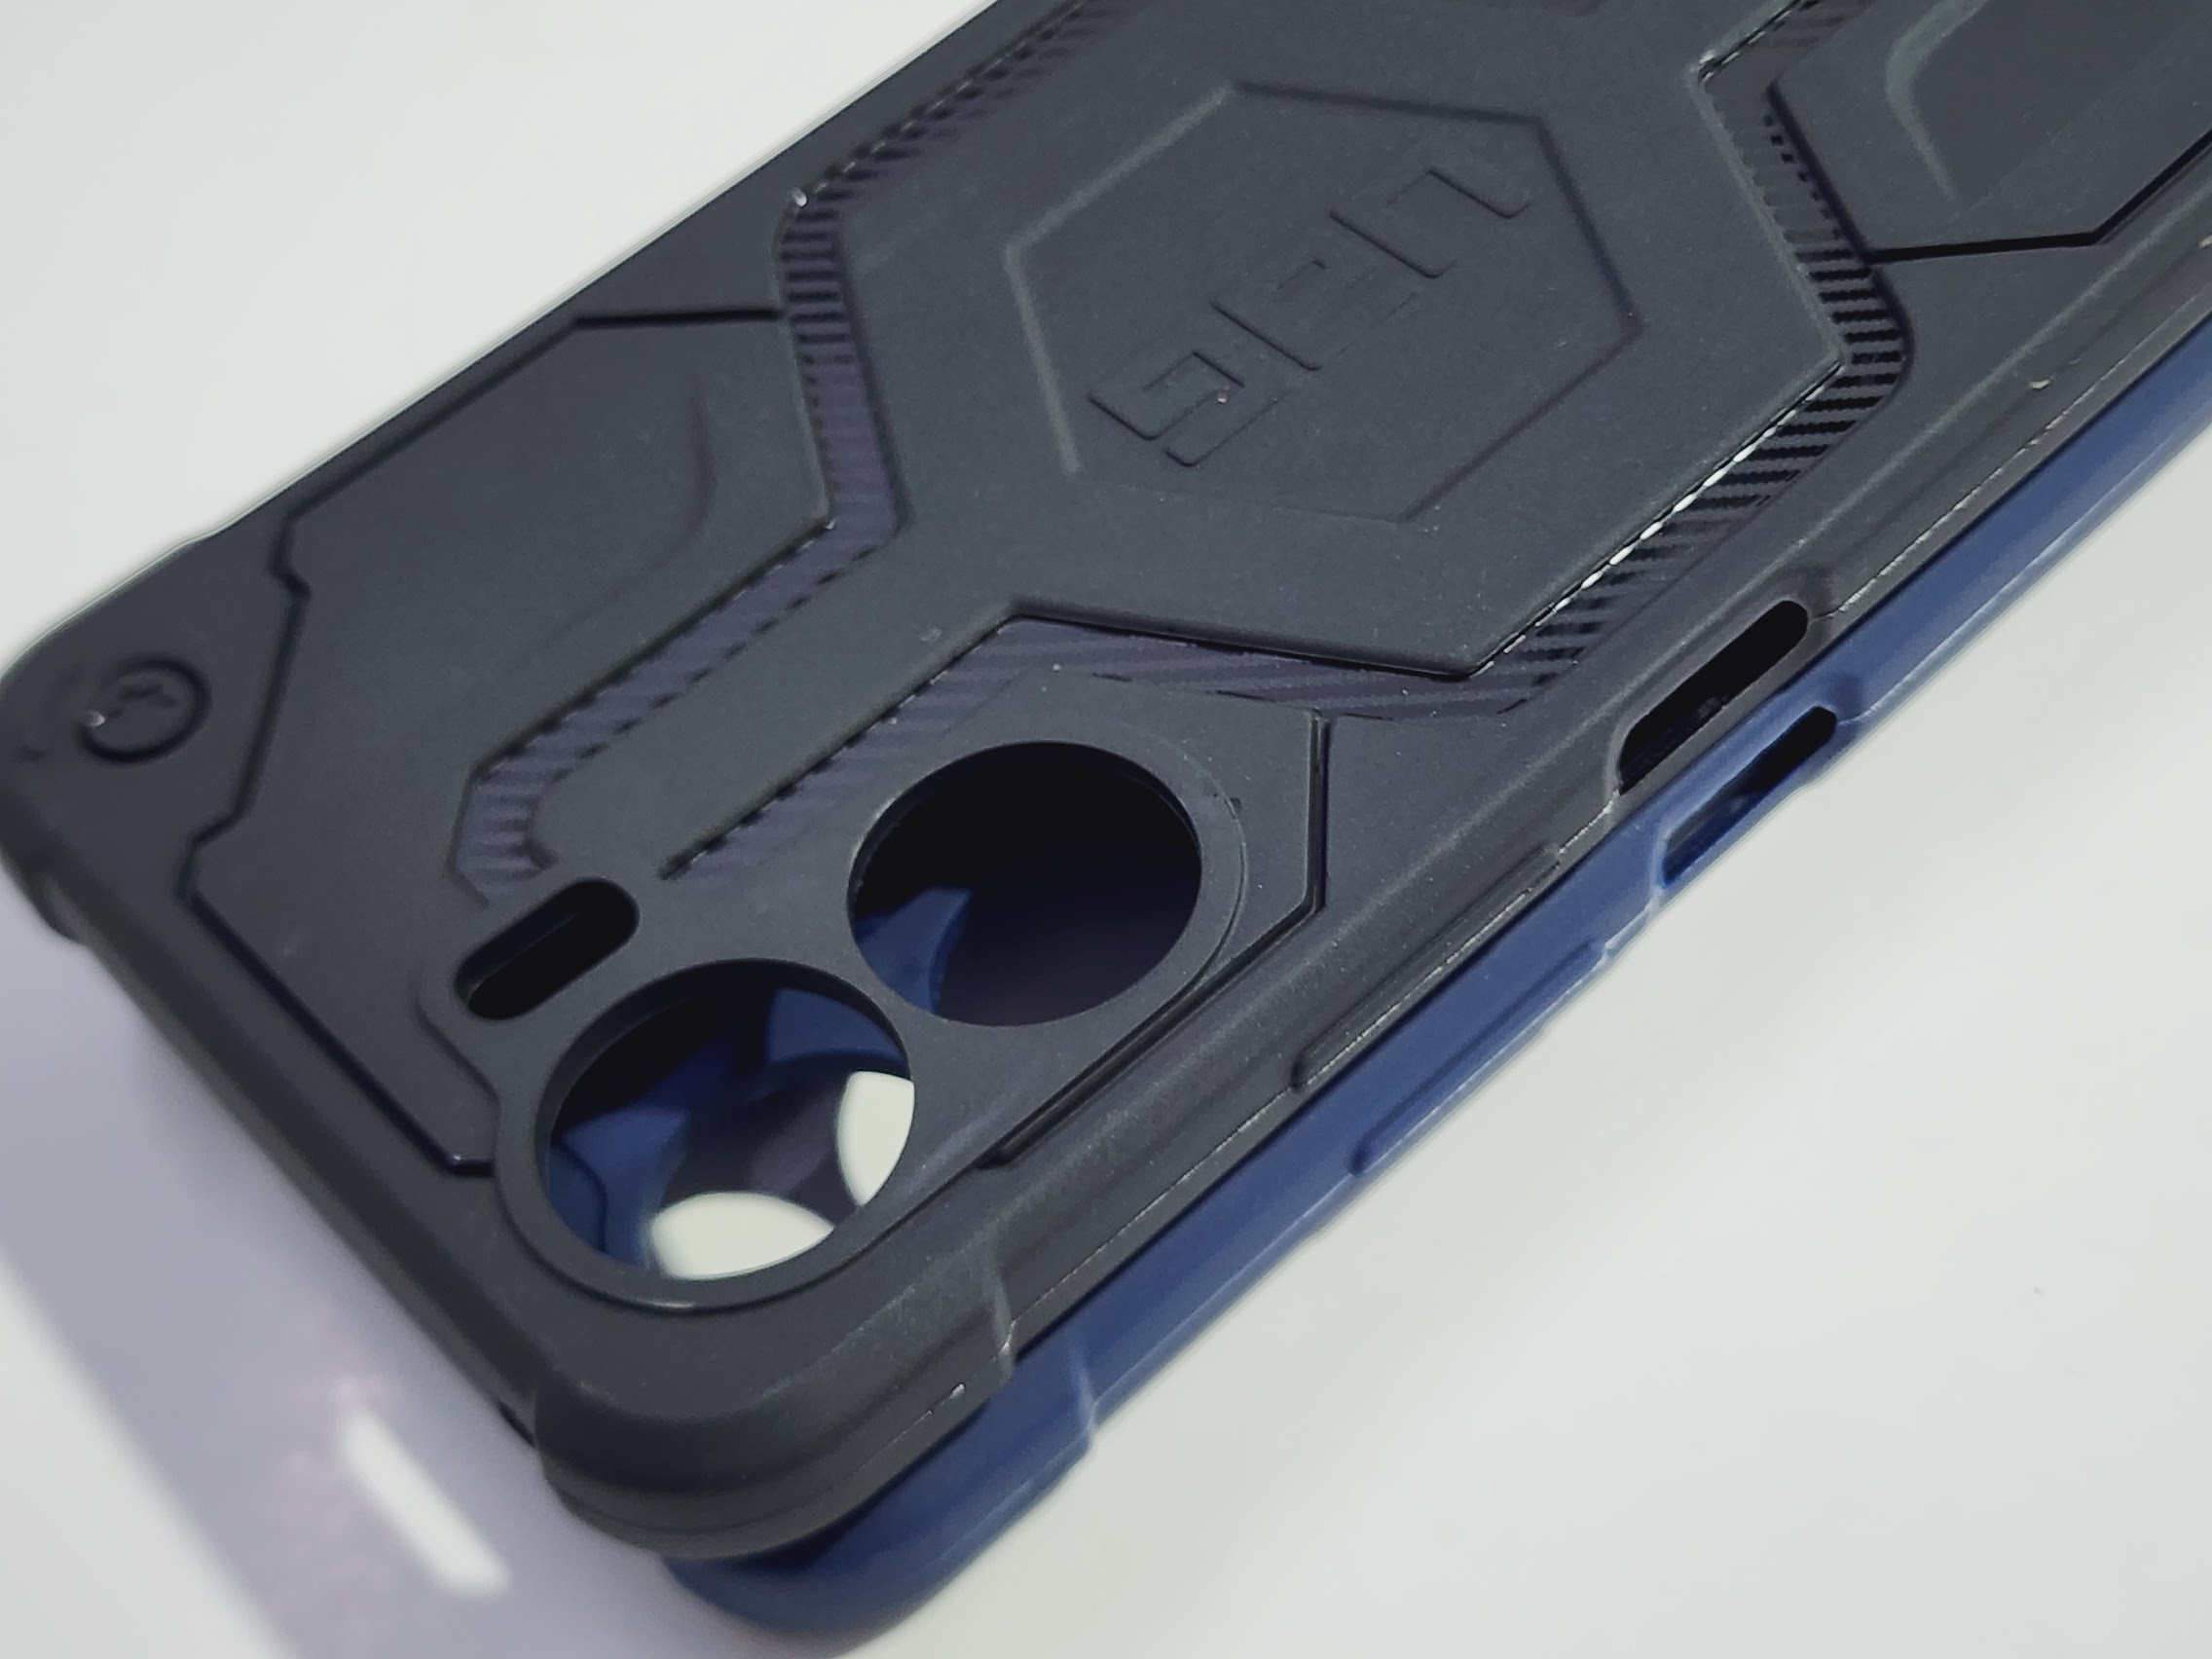 Vivo T2 5G UAG Back Cover with camera protection – BT Limited Edition Store